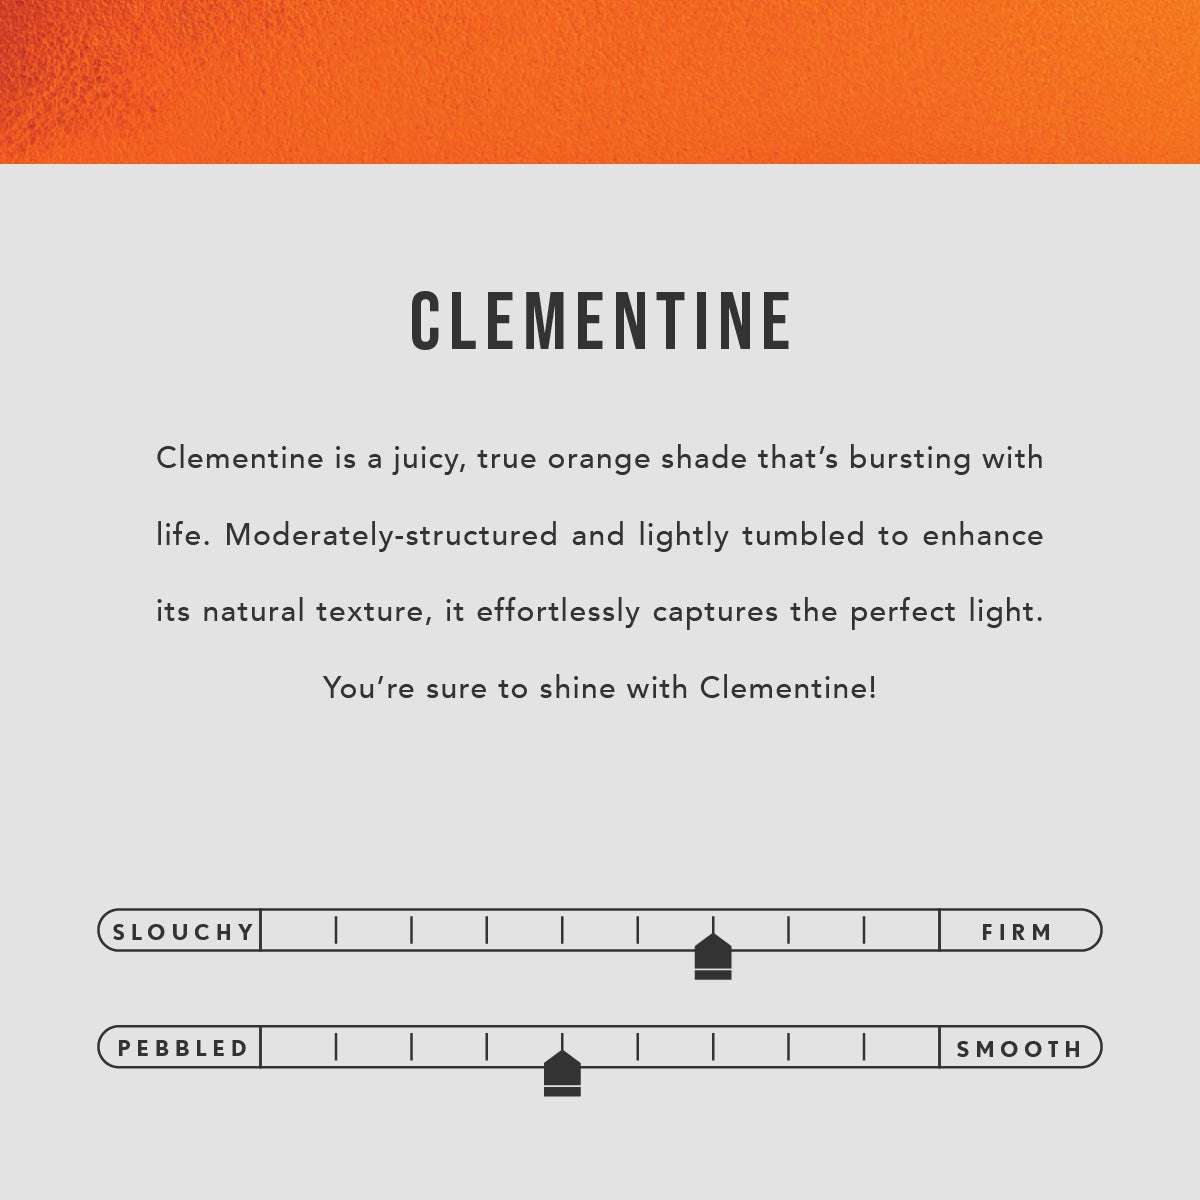 Clementine | infographic